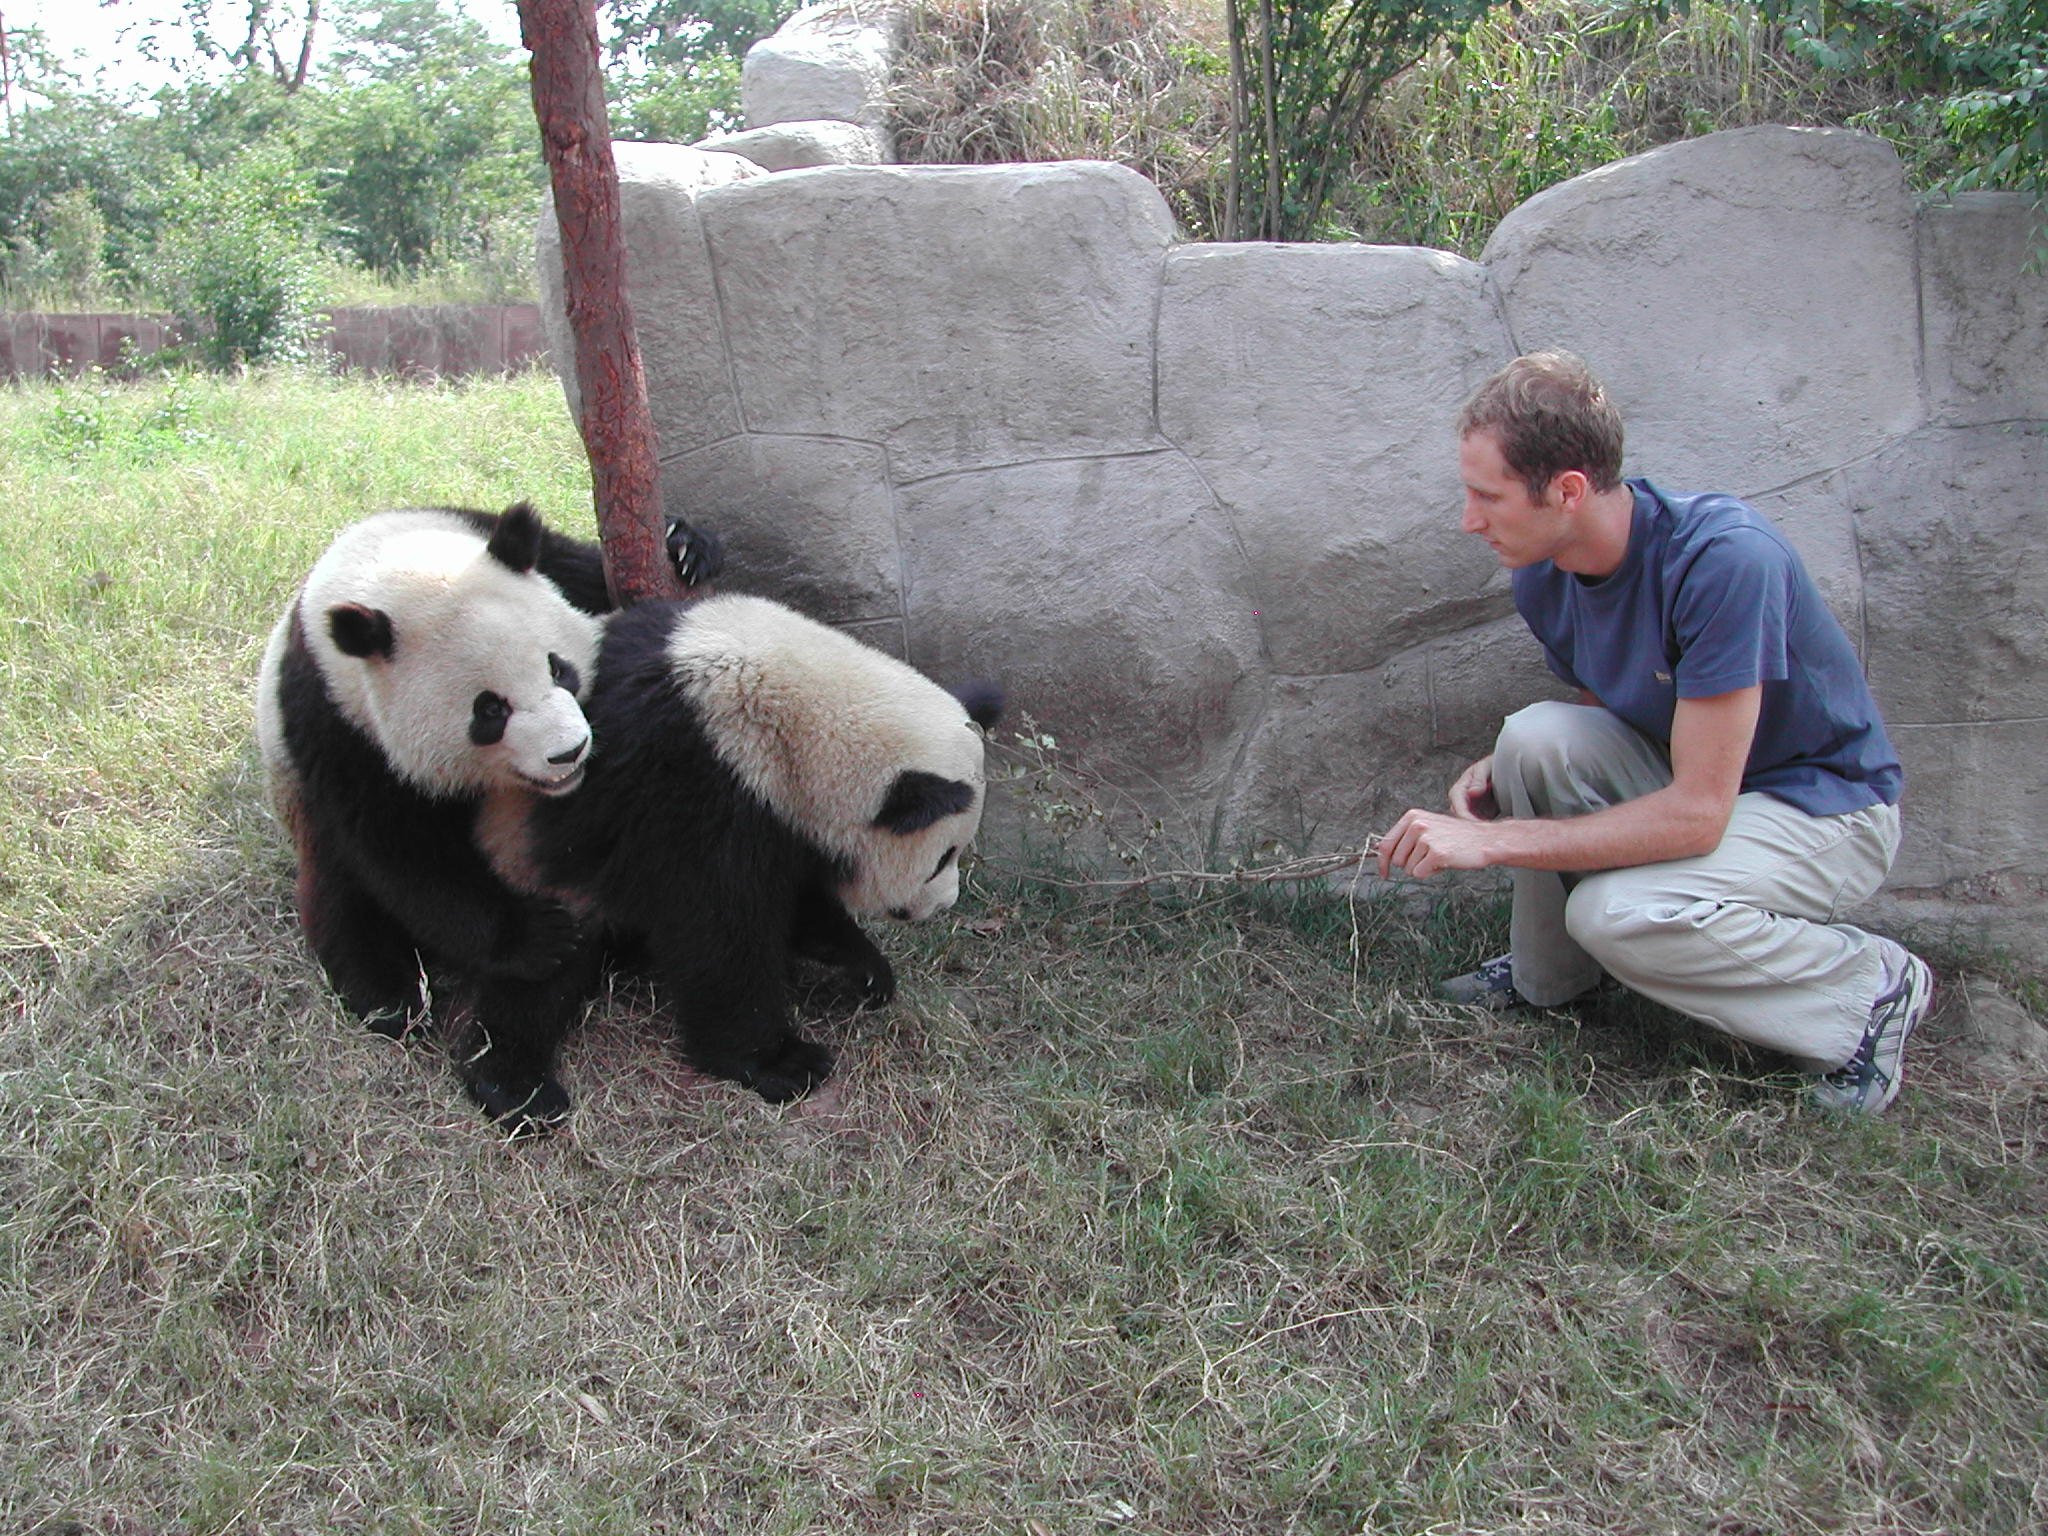 Photo inside the panda reserve in Chendgu, China where David leaped in over a concrete ravine to say hello.  The story unfolds in minute 103:41 of the  interview.